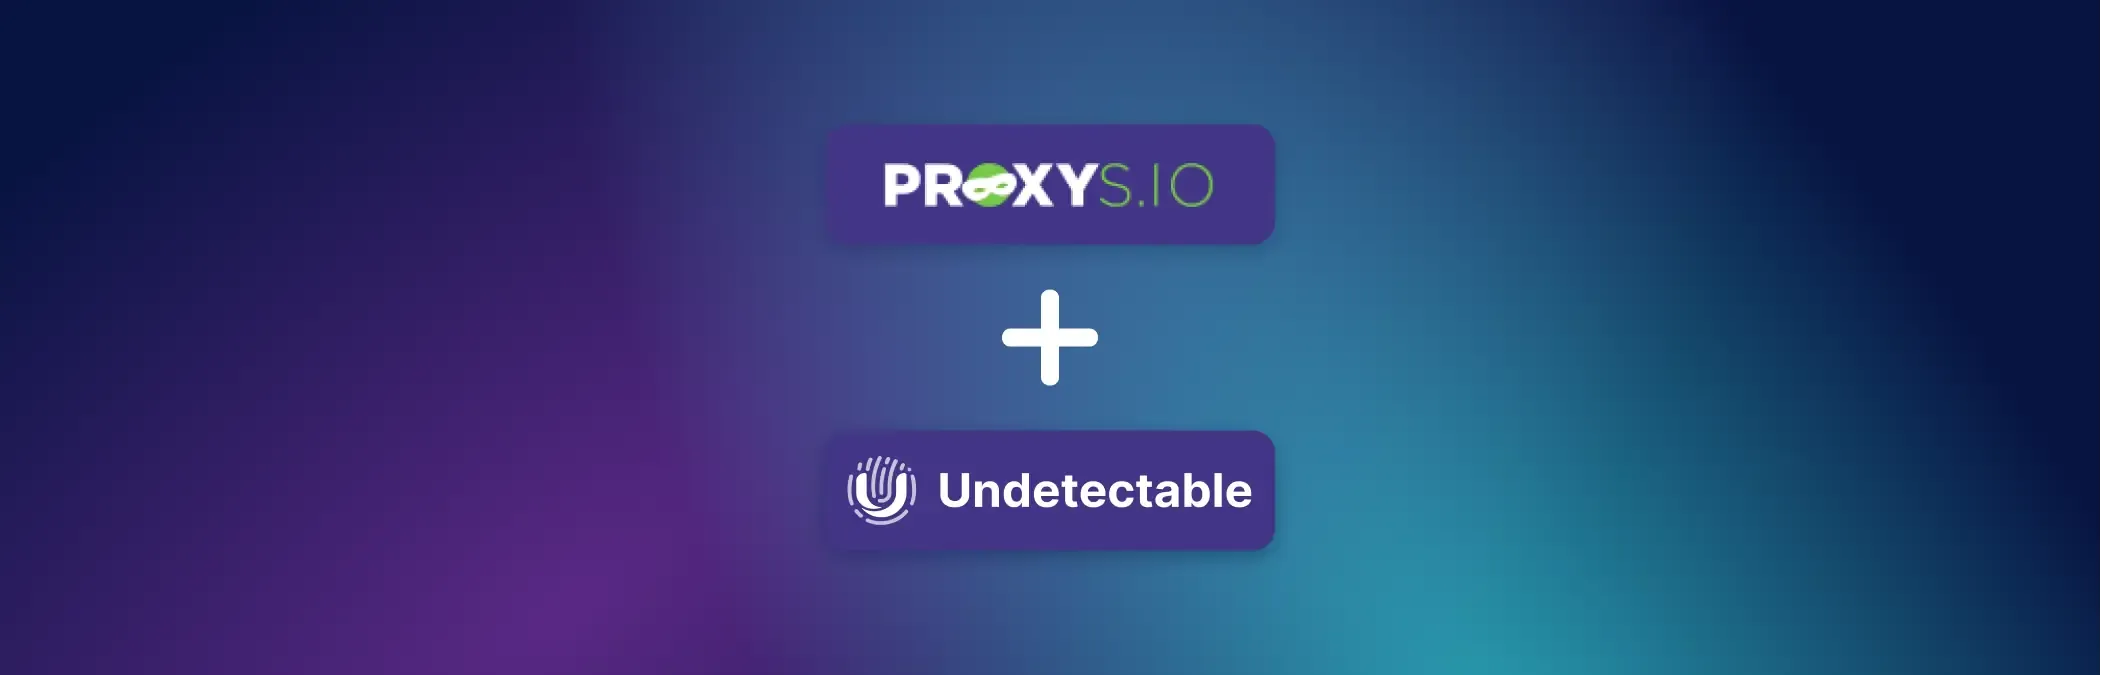 How to use Proxys.io in the Undetectable browser: detailed instructions